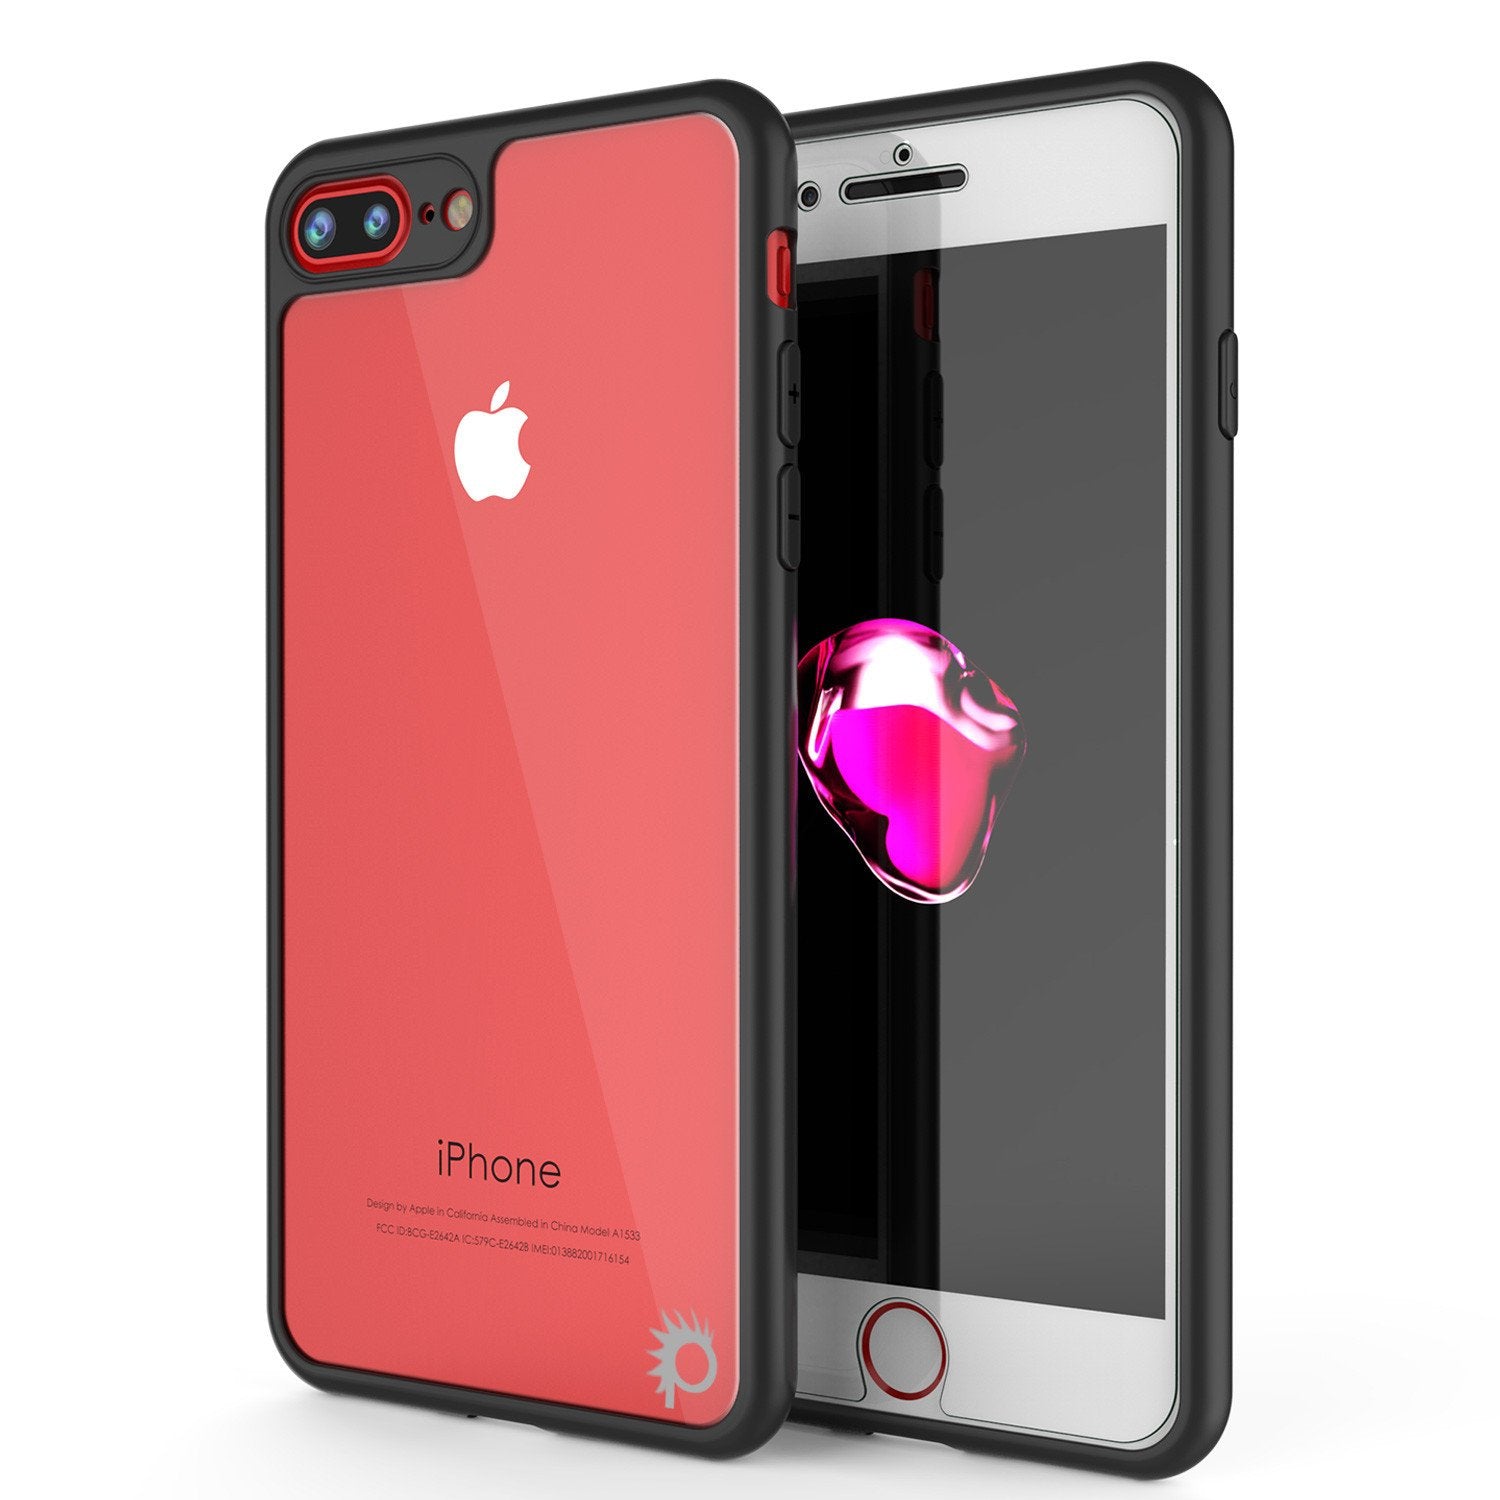 iPhone 7 Case, Punkcase [MASK Series] [PINK] Full Body Hybrid Dual Layer TPU Cover [Clear Back] [Non Slip] [Ultra Thin Fit] W/ protective Tempered Glass Screen Protector for Apple iPhone 7S